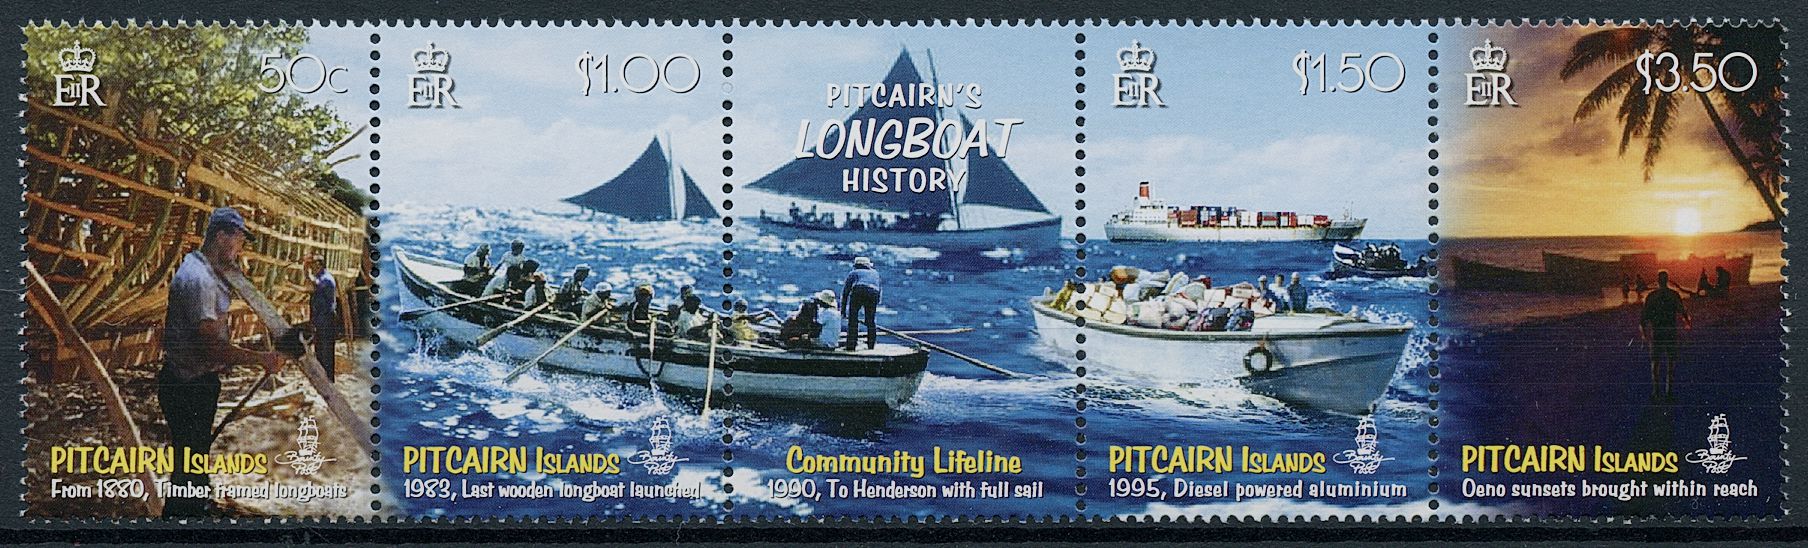 Pitcairn Islands 2008 MNH Nautical Stamps Pitcairn's Longboat History 4v Strip